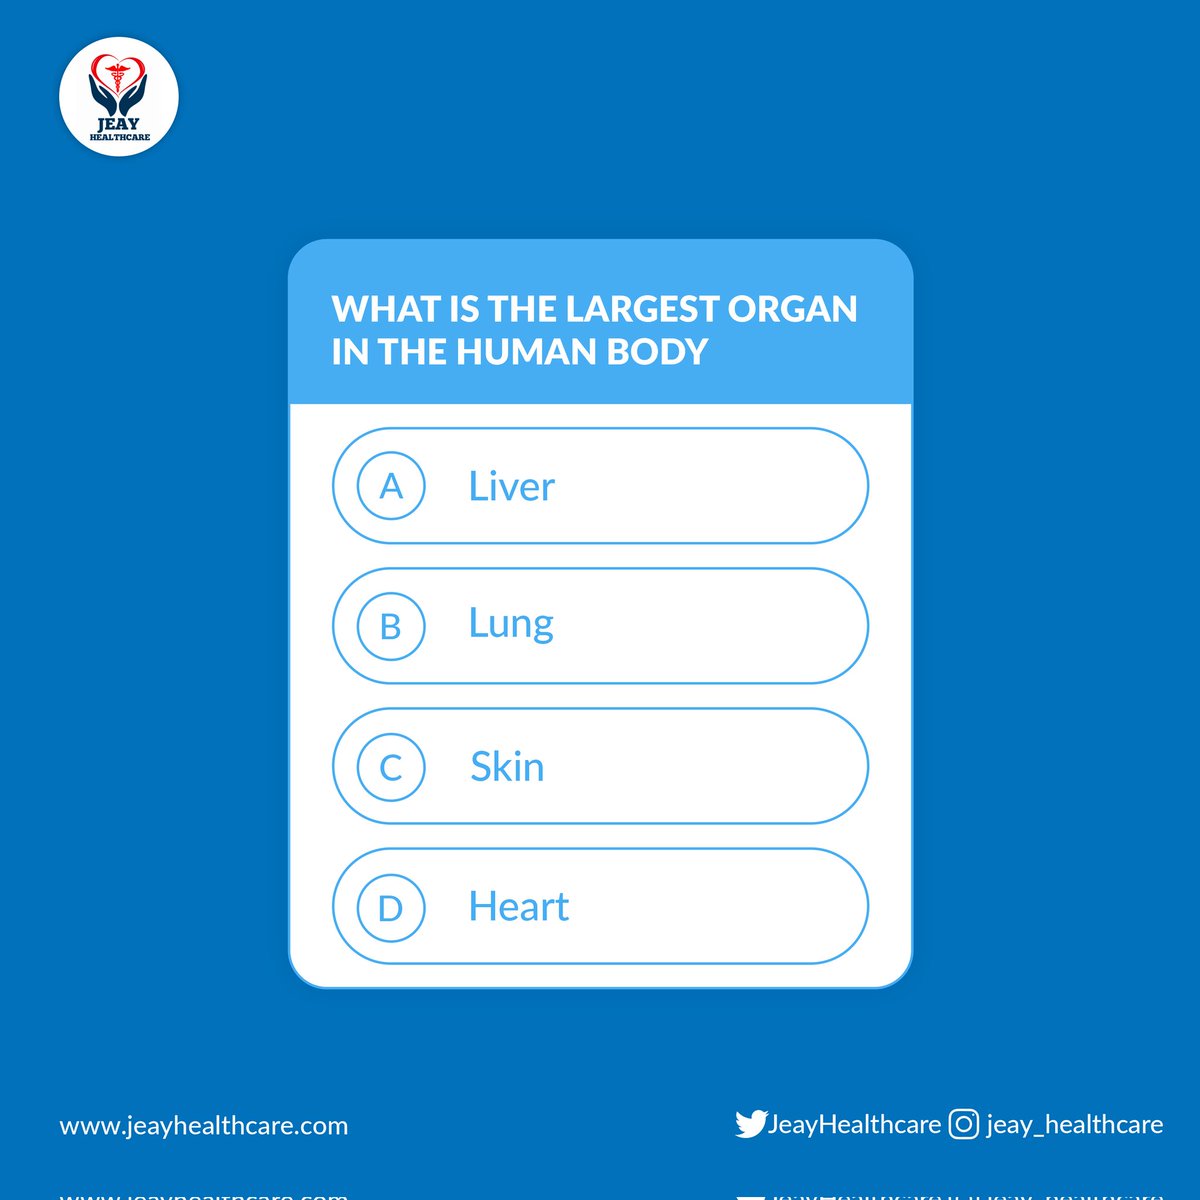 Yay, it's another beautiful time for a Friday Quiz.

Drop an answer to the question in the comment section.
Happy Weekend!

#fridayquiz #friday #happyweekend #testingknowledge #healthquiz